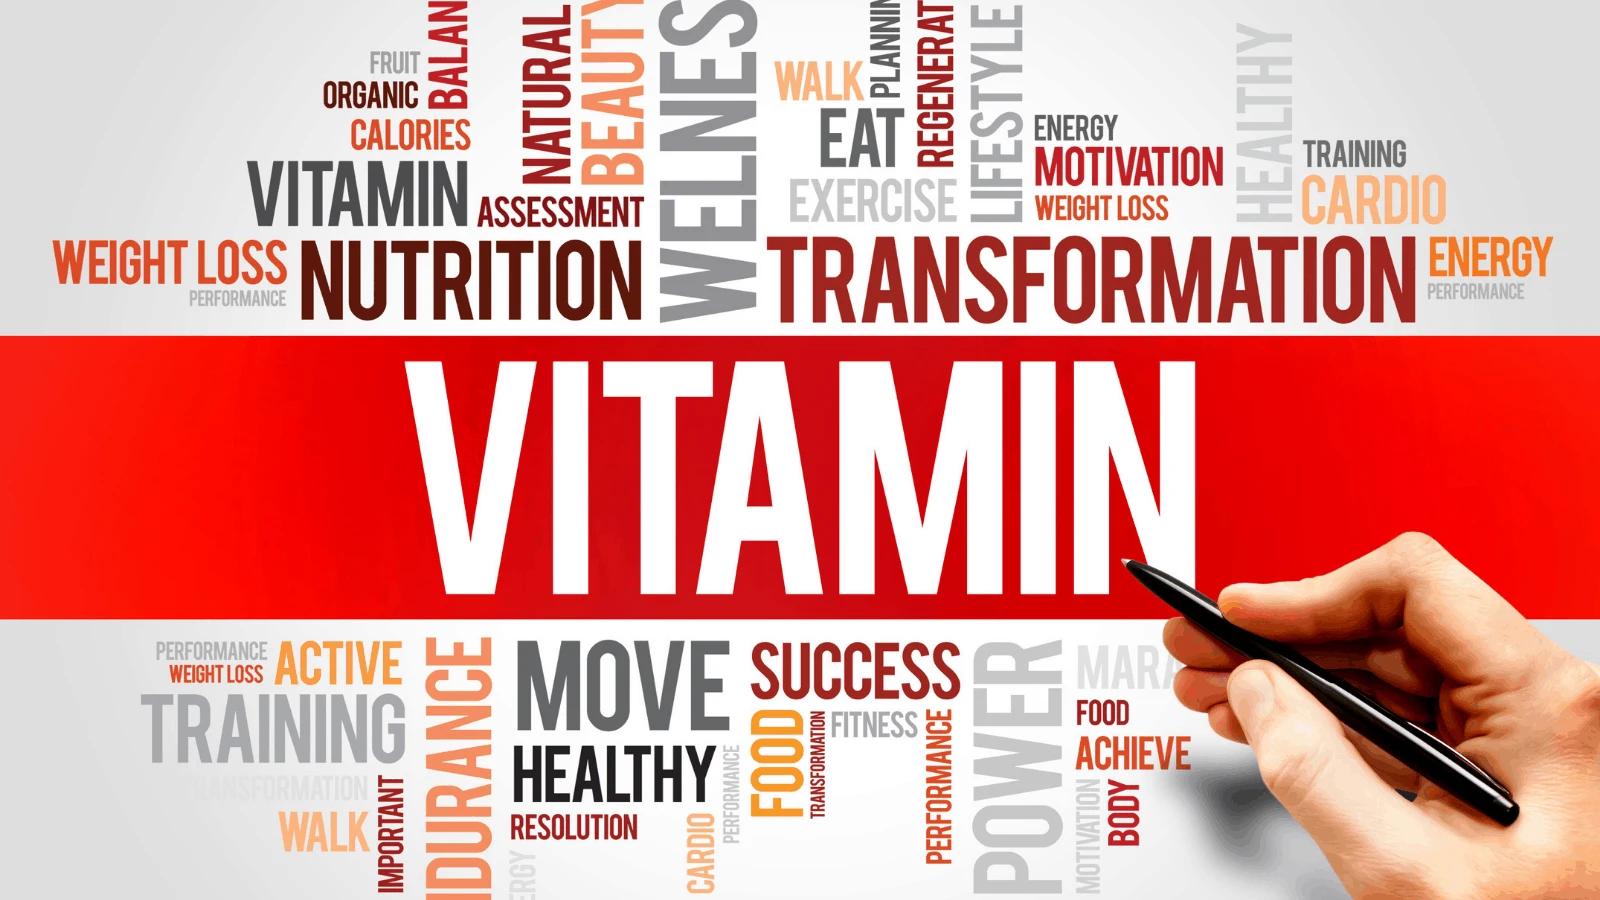 How To Choose The Best Vitamins For Teens